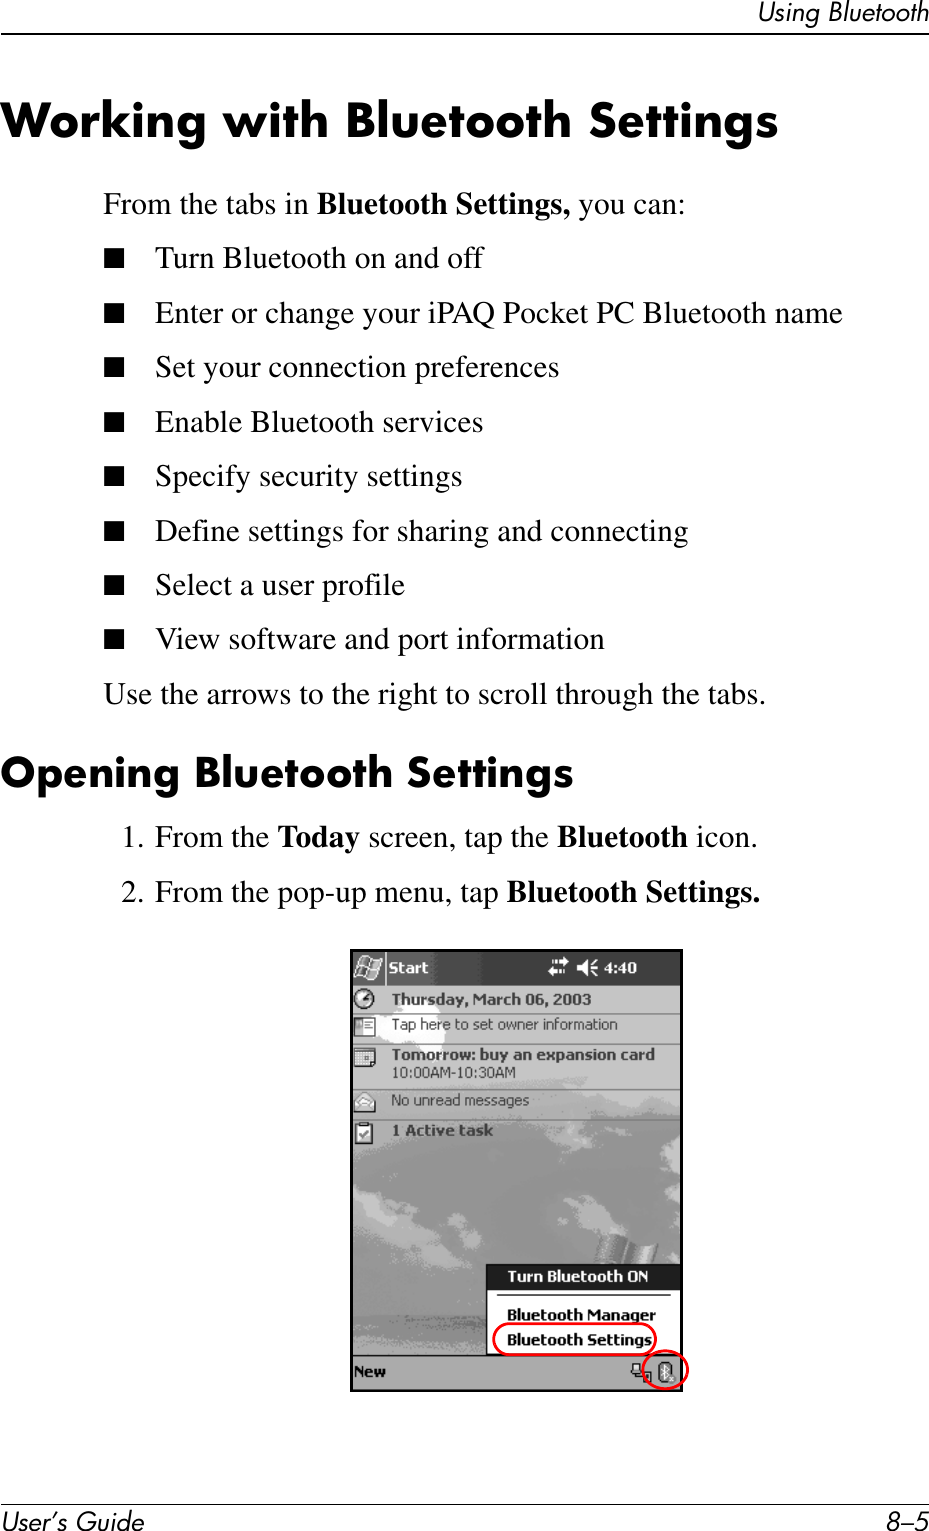 Using BluetoothUser’s Guide 8–5Working with Bluetooth SettingsFrom the tabs in Bluetooth Settings, you can:■Turn Bluetooth on and off■Enter or change your iPAQ Pocket PC Bluetooth name■Set your connection preferences■Enable Bluetooth services■Specify security settings■Define settings for sharing and connecting■Select a user profile■View software and port informationUse the arrows to the right to scroll through the tabs.Opening Bluetooth Settings1. From the Today screen, tap the Bluetooth icon.2. From the pop-up menu, tap Bluetooth Settings.